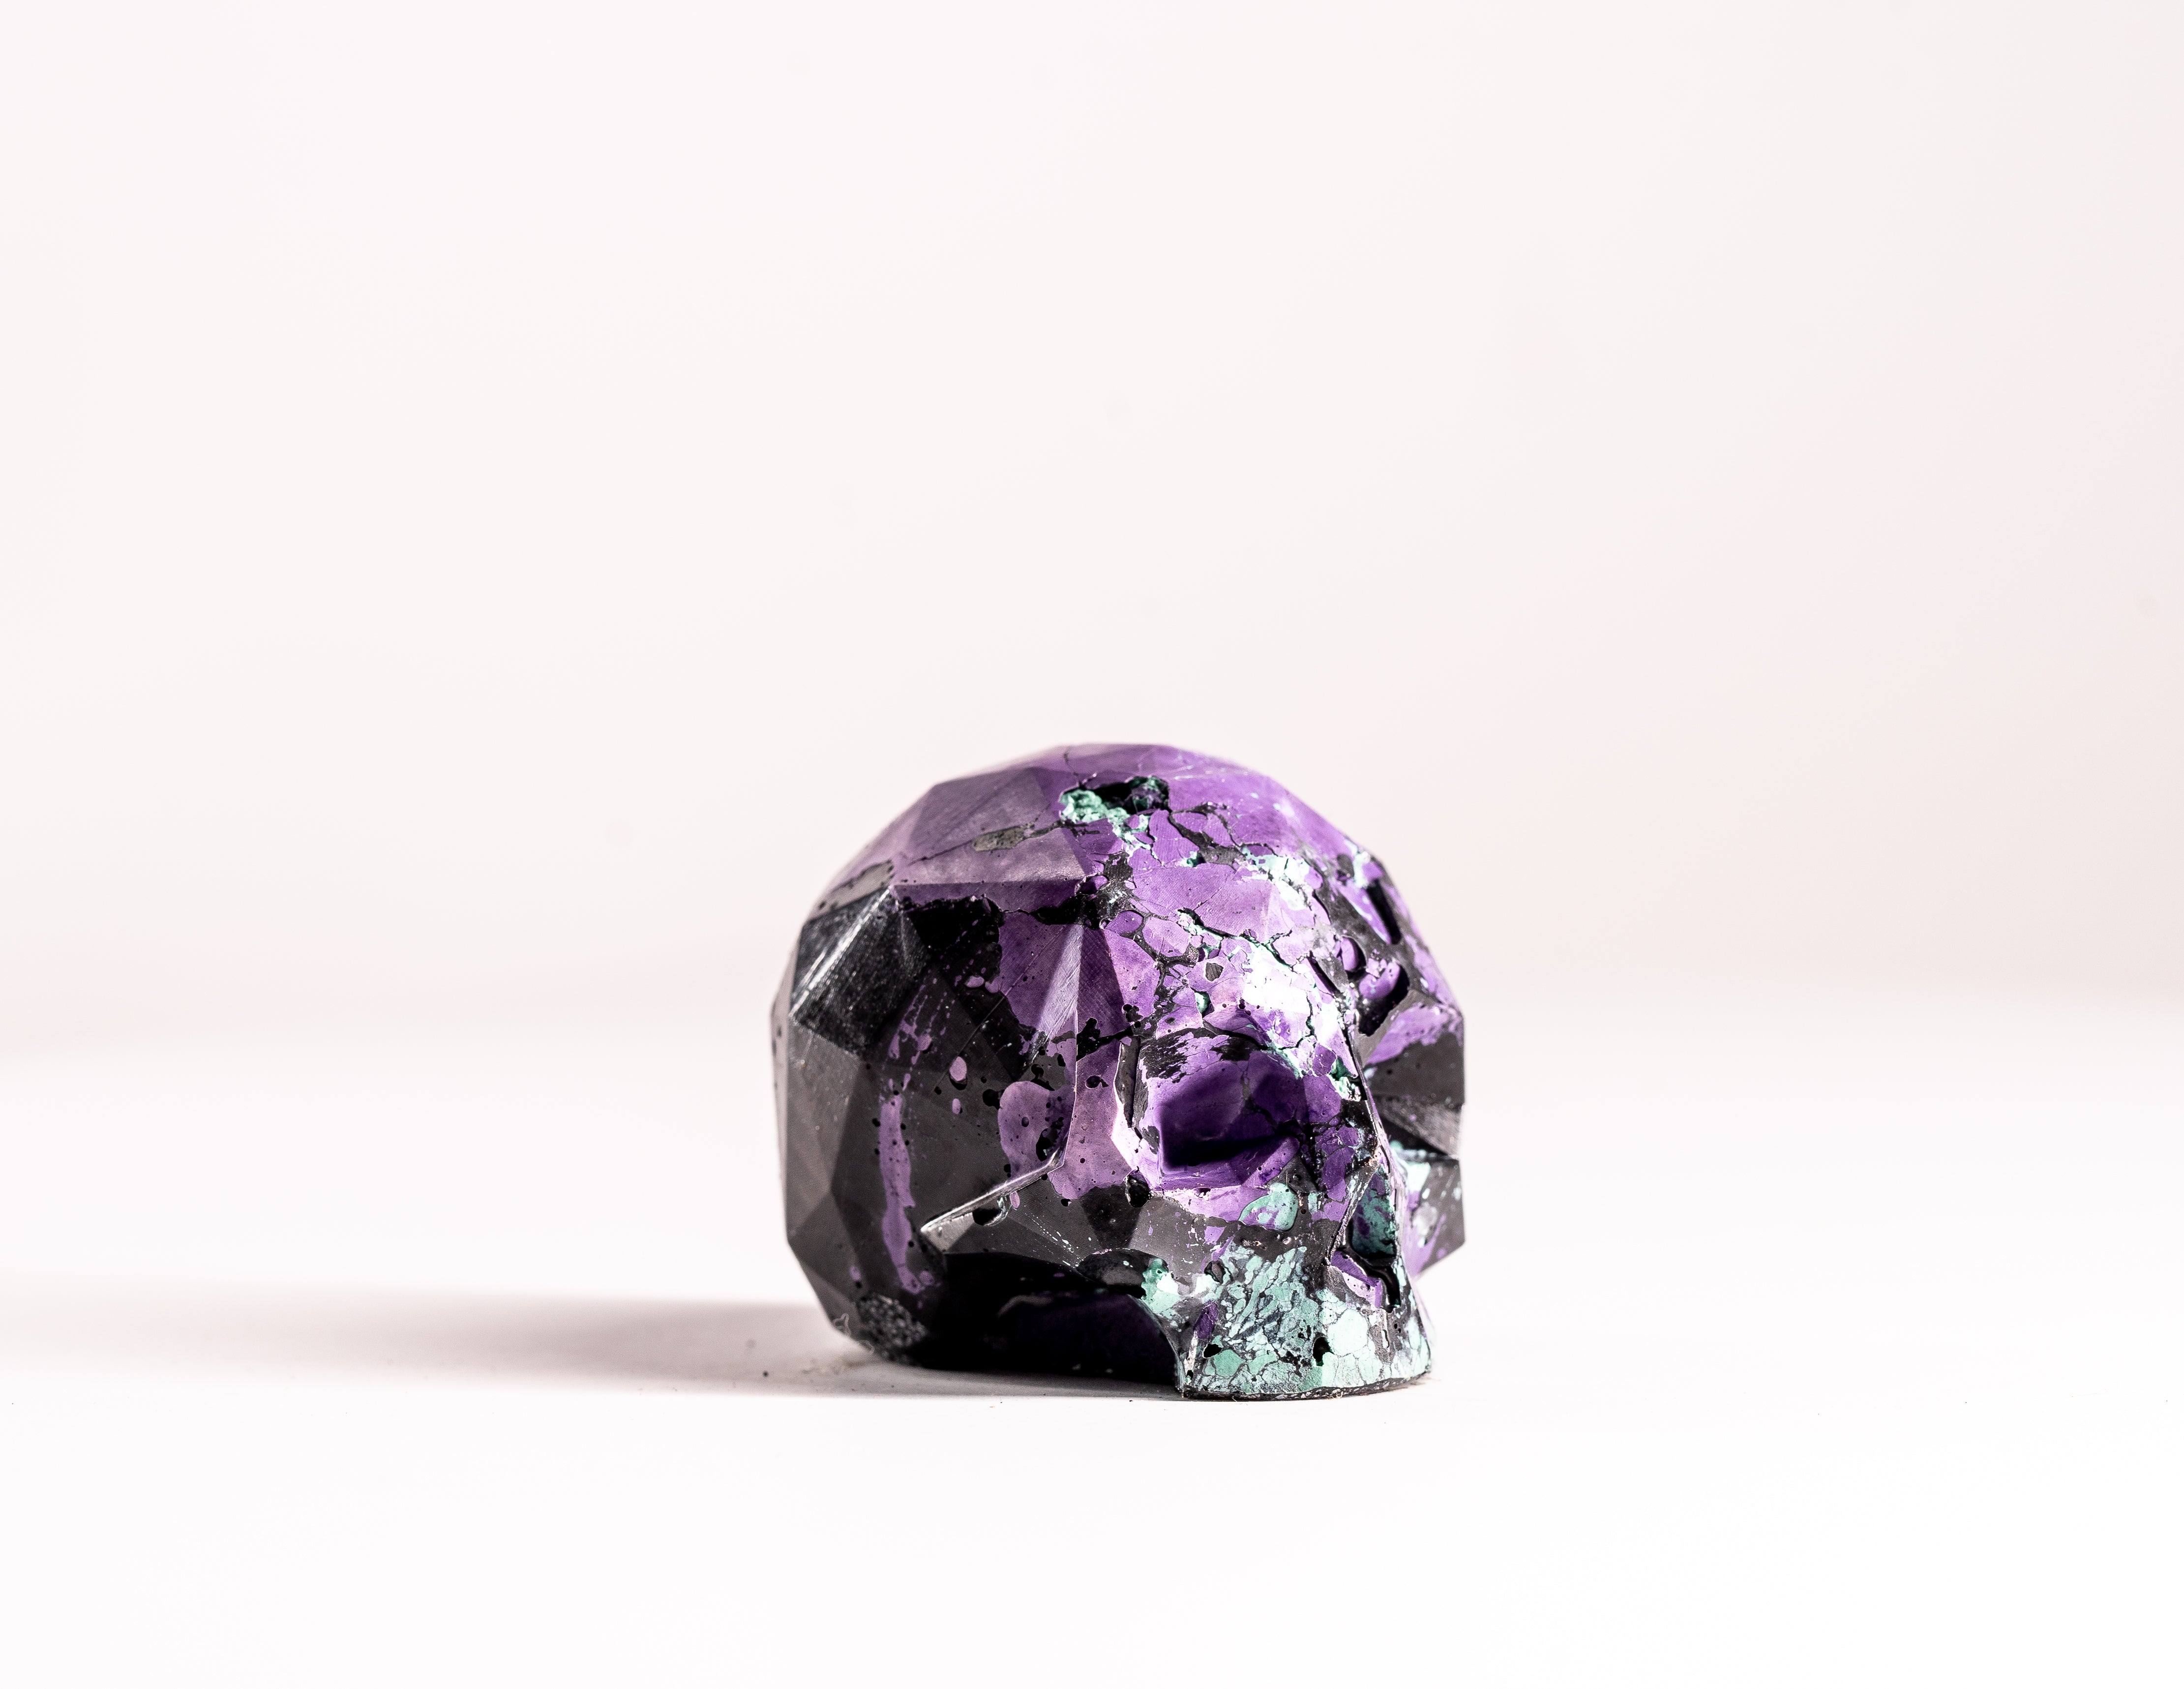 Mini Collectible Skull - Marbled - 153